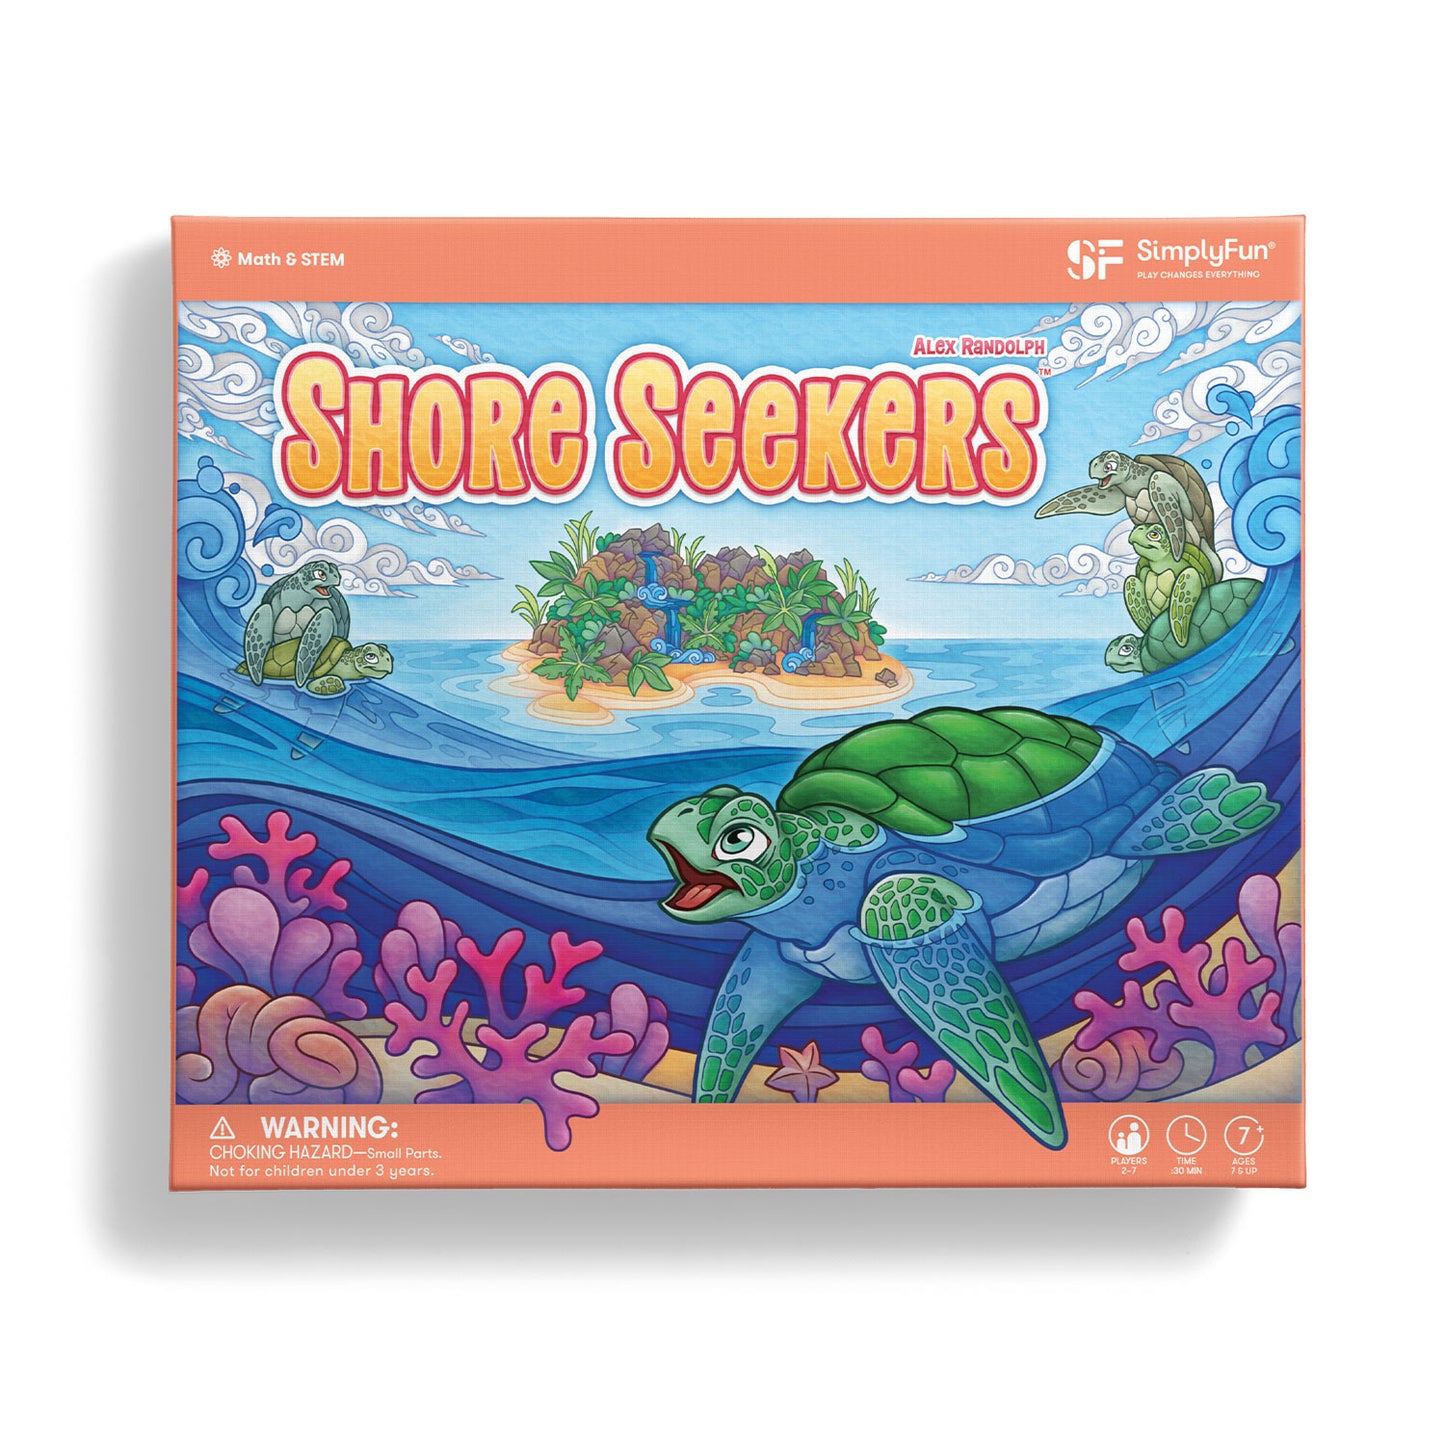 Shore Seekers by SimplyFun is a fun math game focusing on addition and early multiplication for ages 7 and up